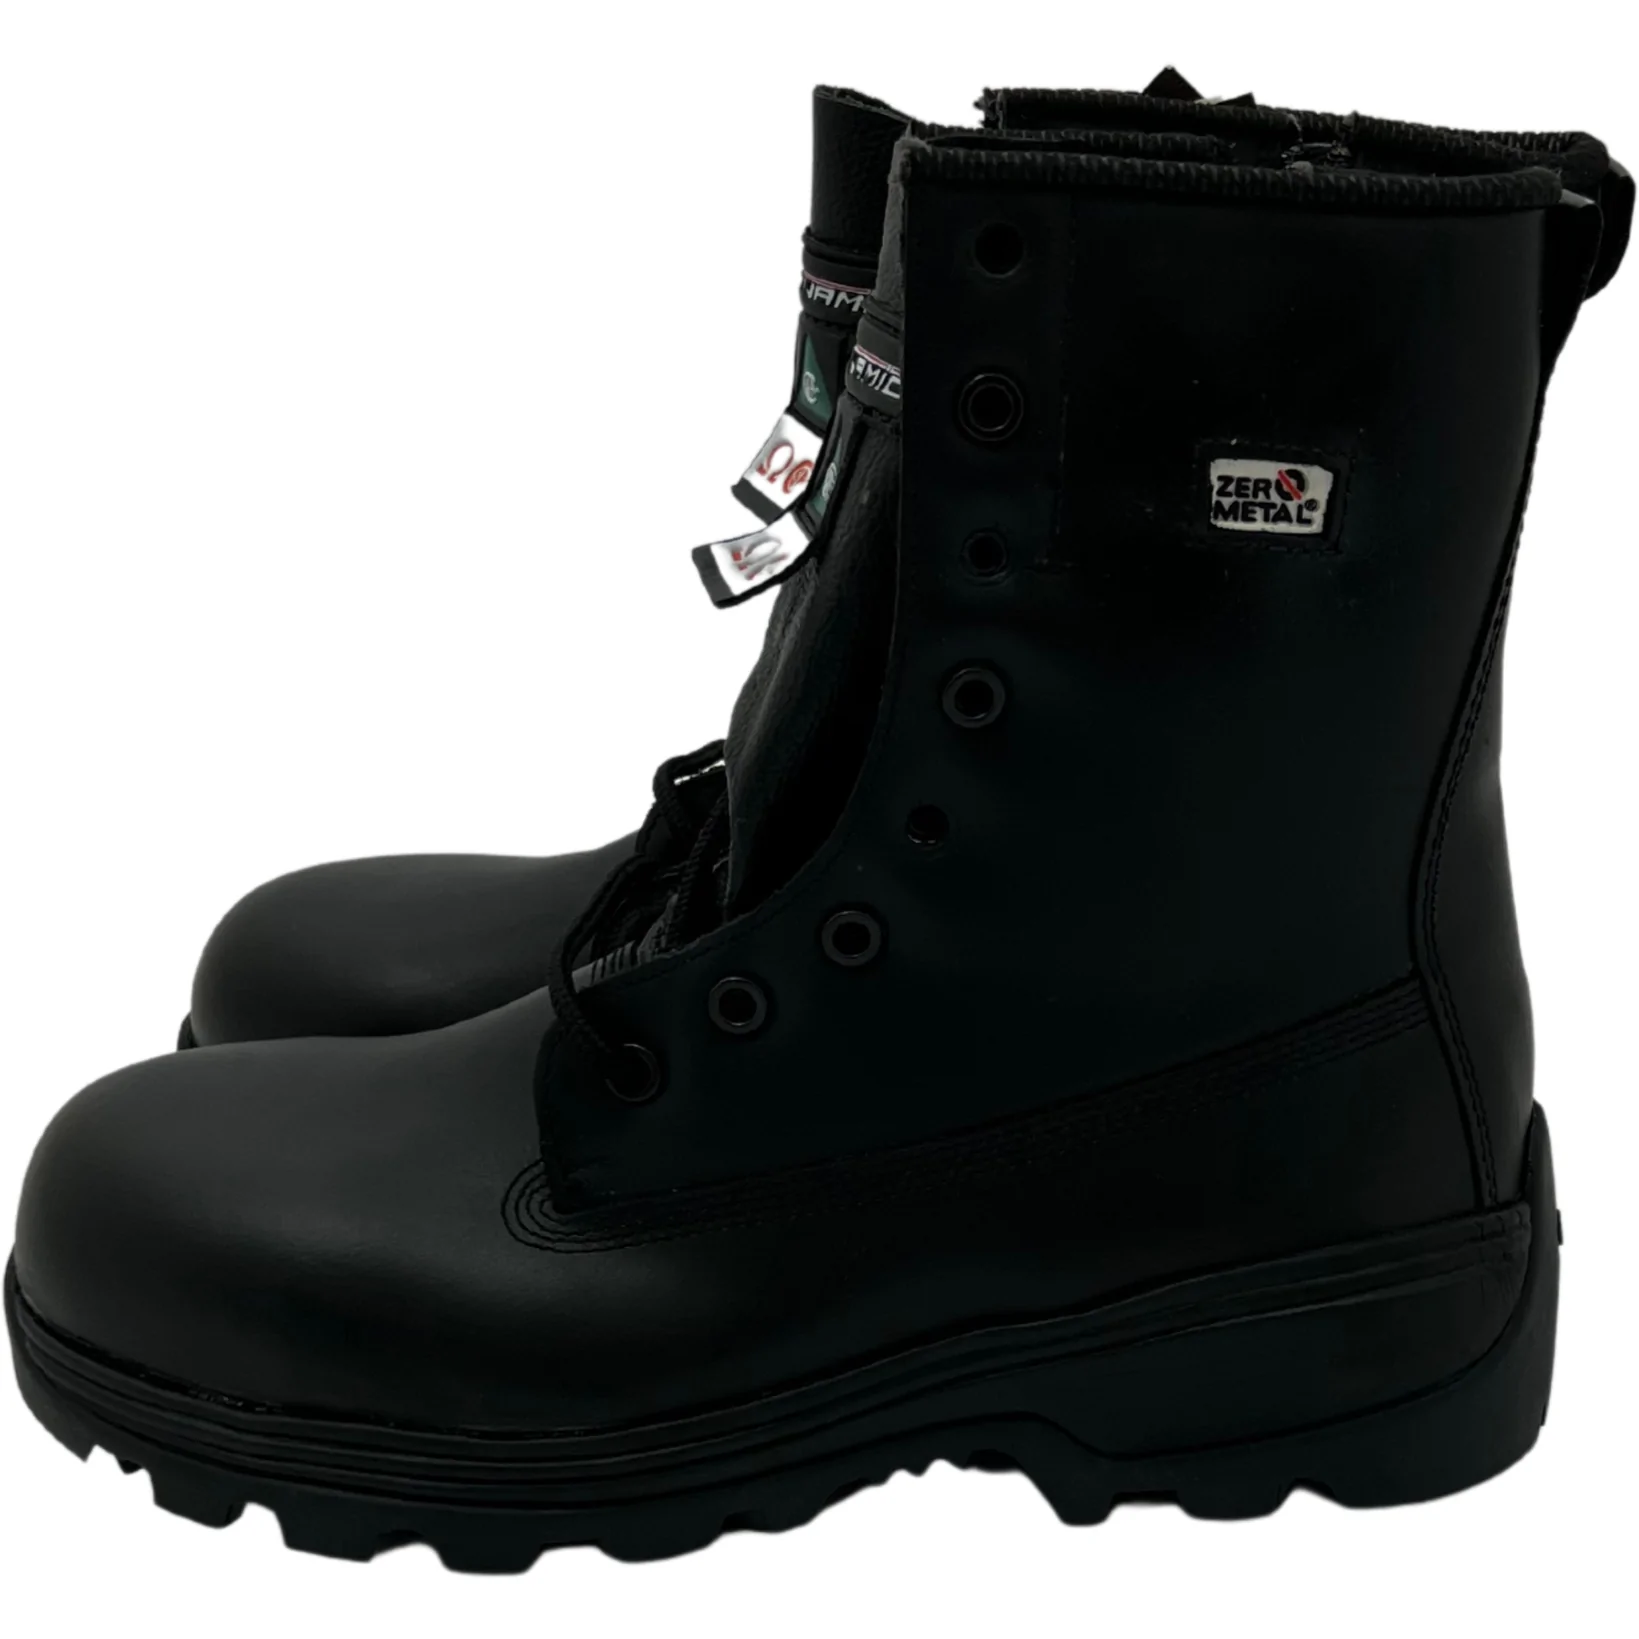 Dynamic Men's Work Boots / Safety Boots / Black / Size 8